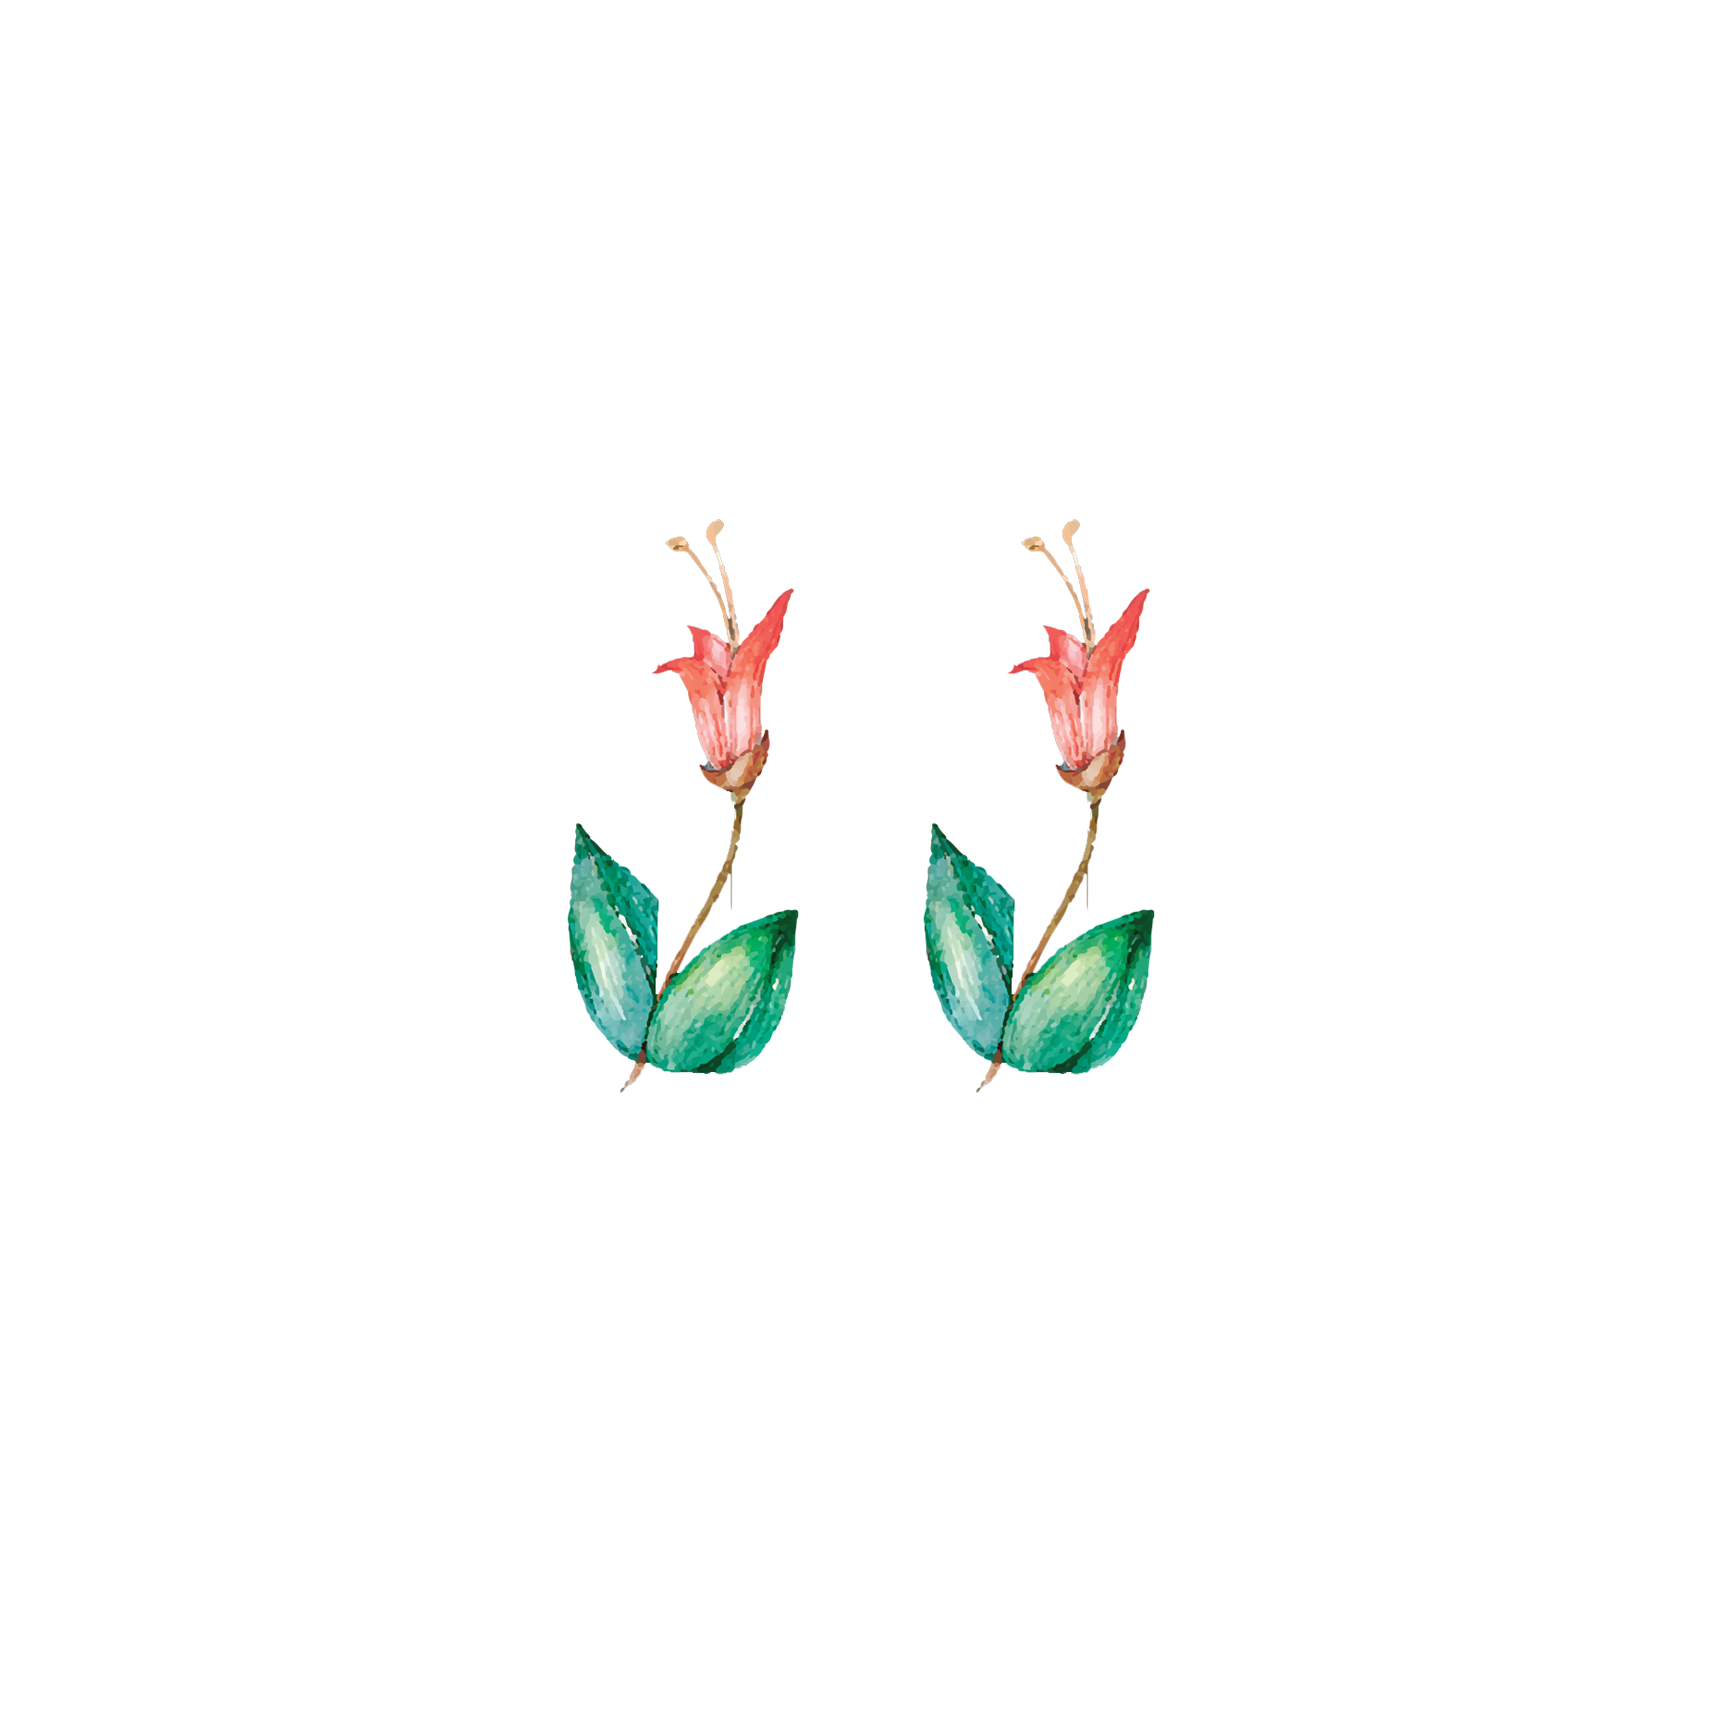 Click to read Day 11 - Loving Kindness